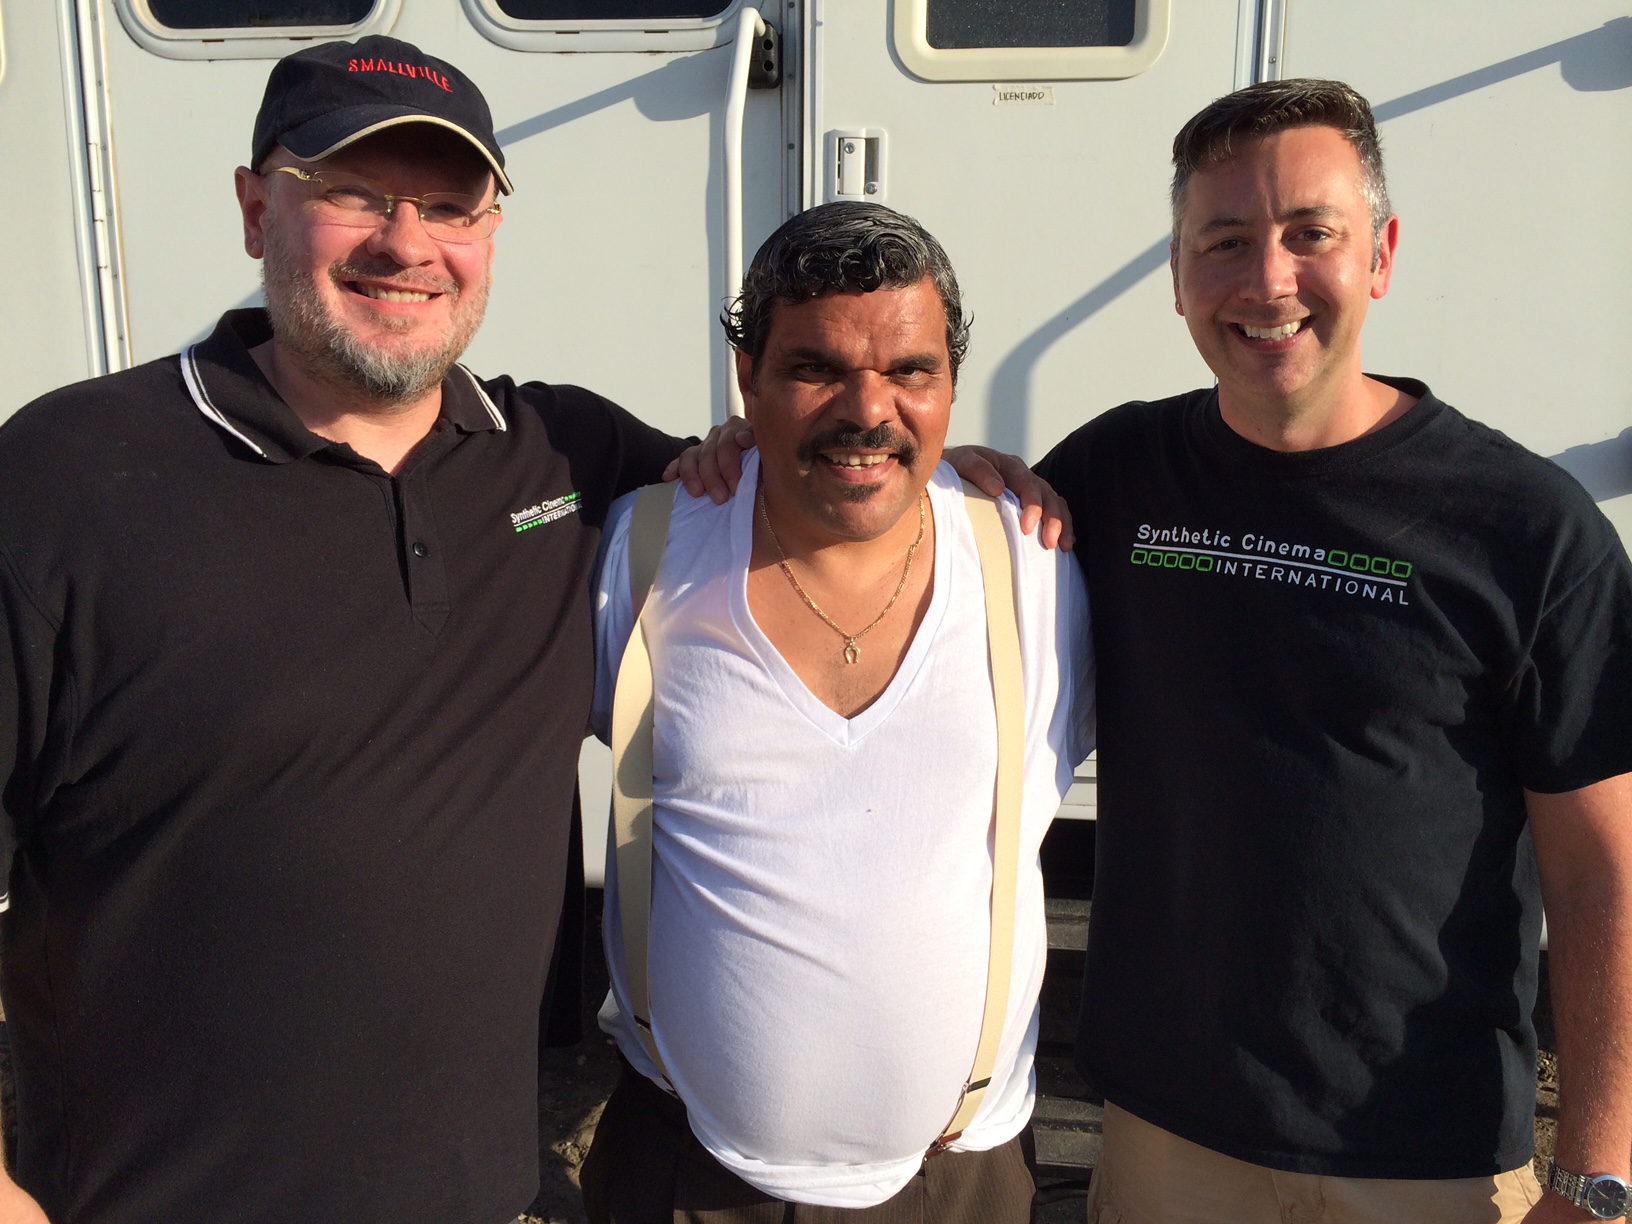 Luis Guzmán on the set of Ana Maria in Novela Land with Producers Zach and Shane O'Brien.